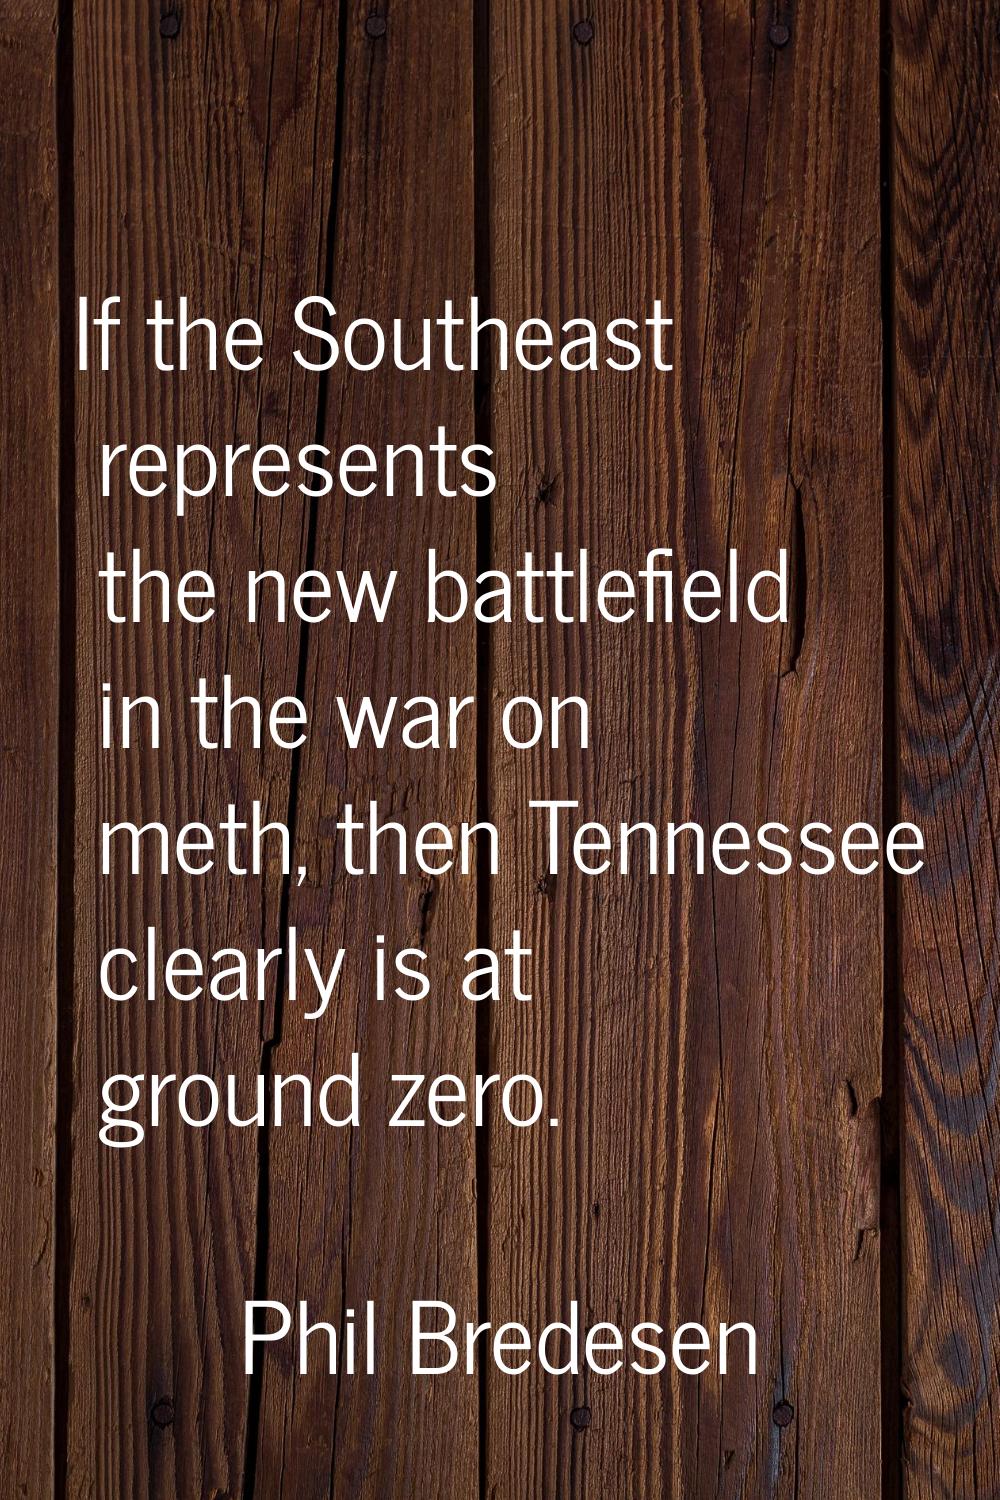 If the Southeast represents the new battlefield in the war on meth, then Tennessee clearly is at gr